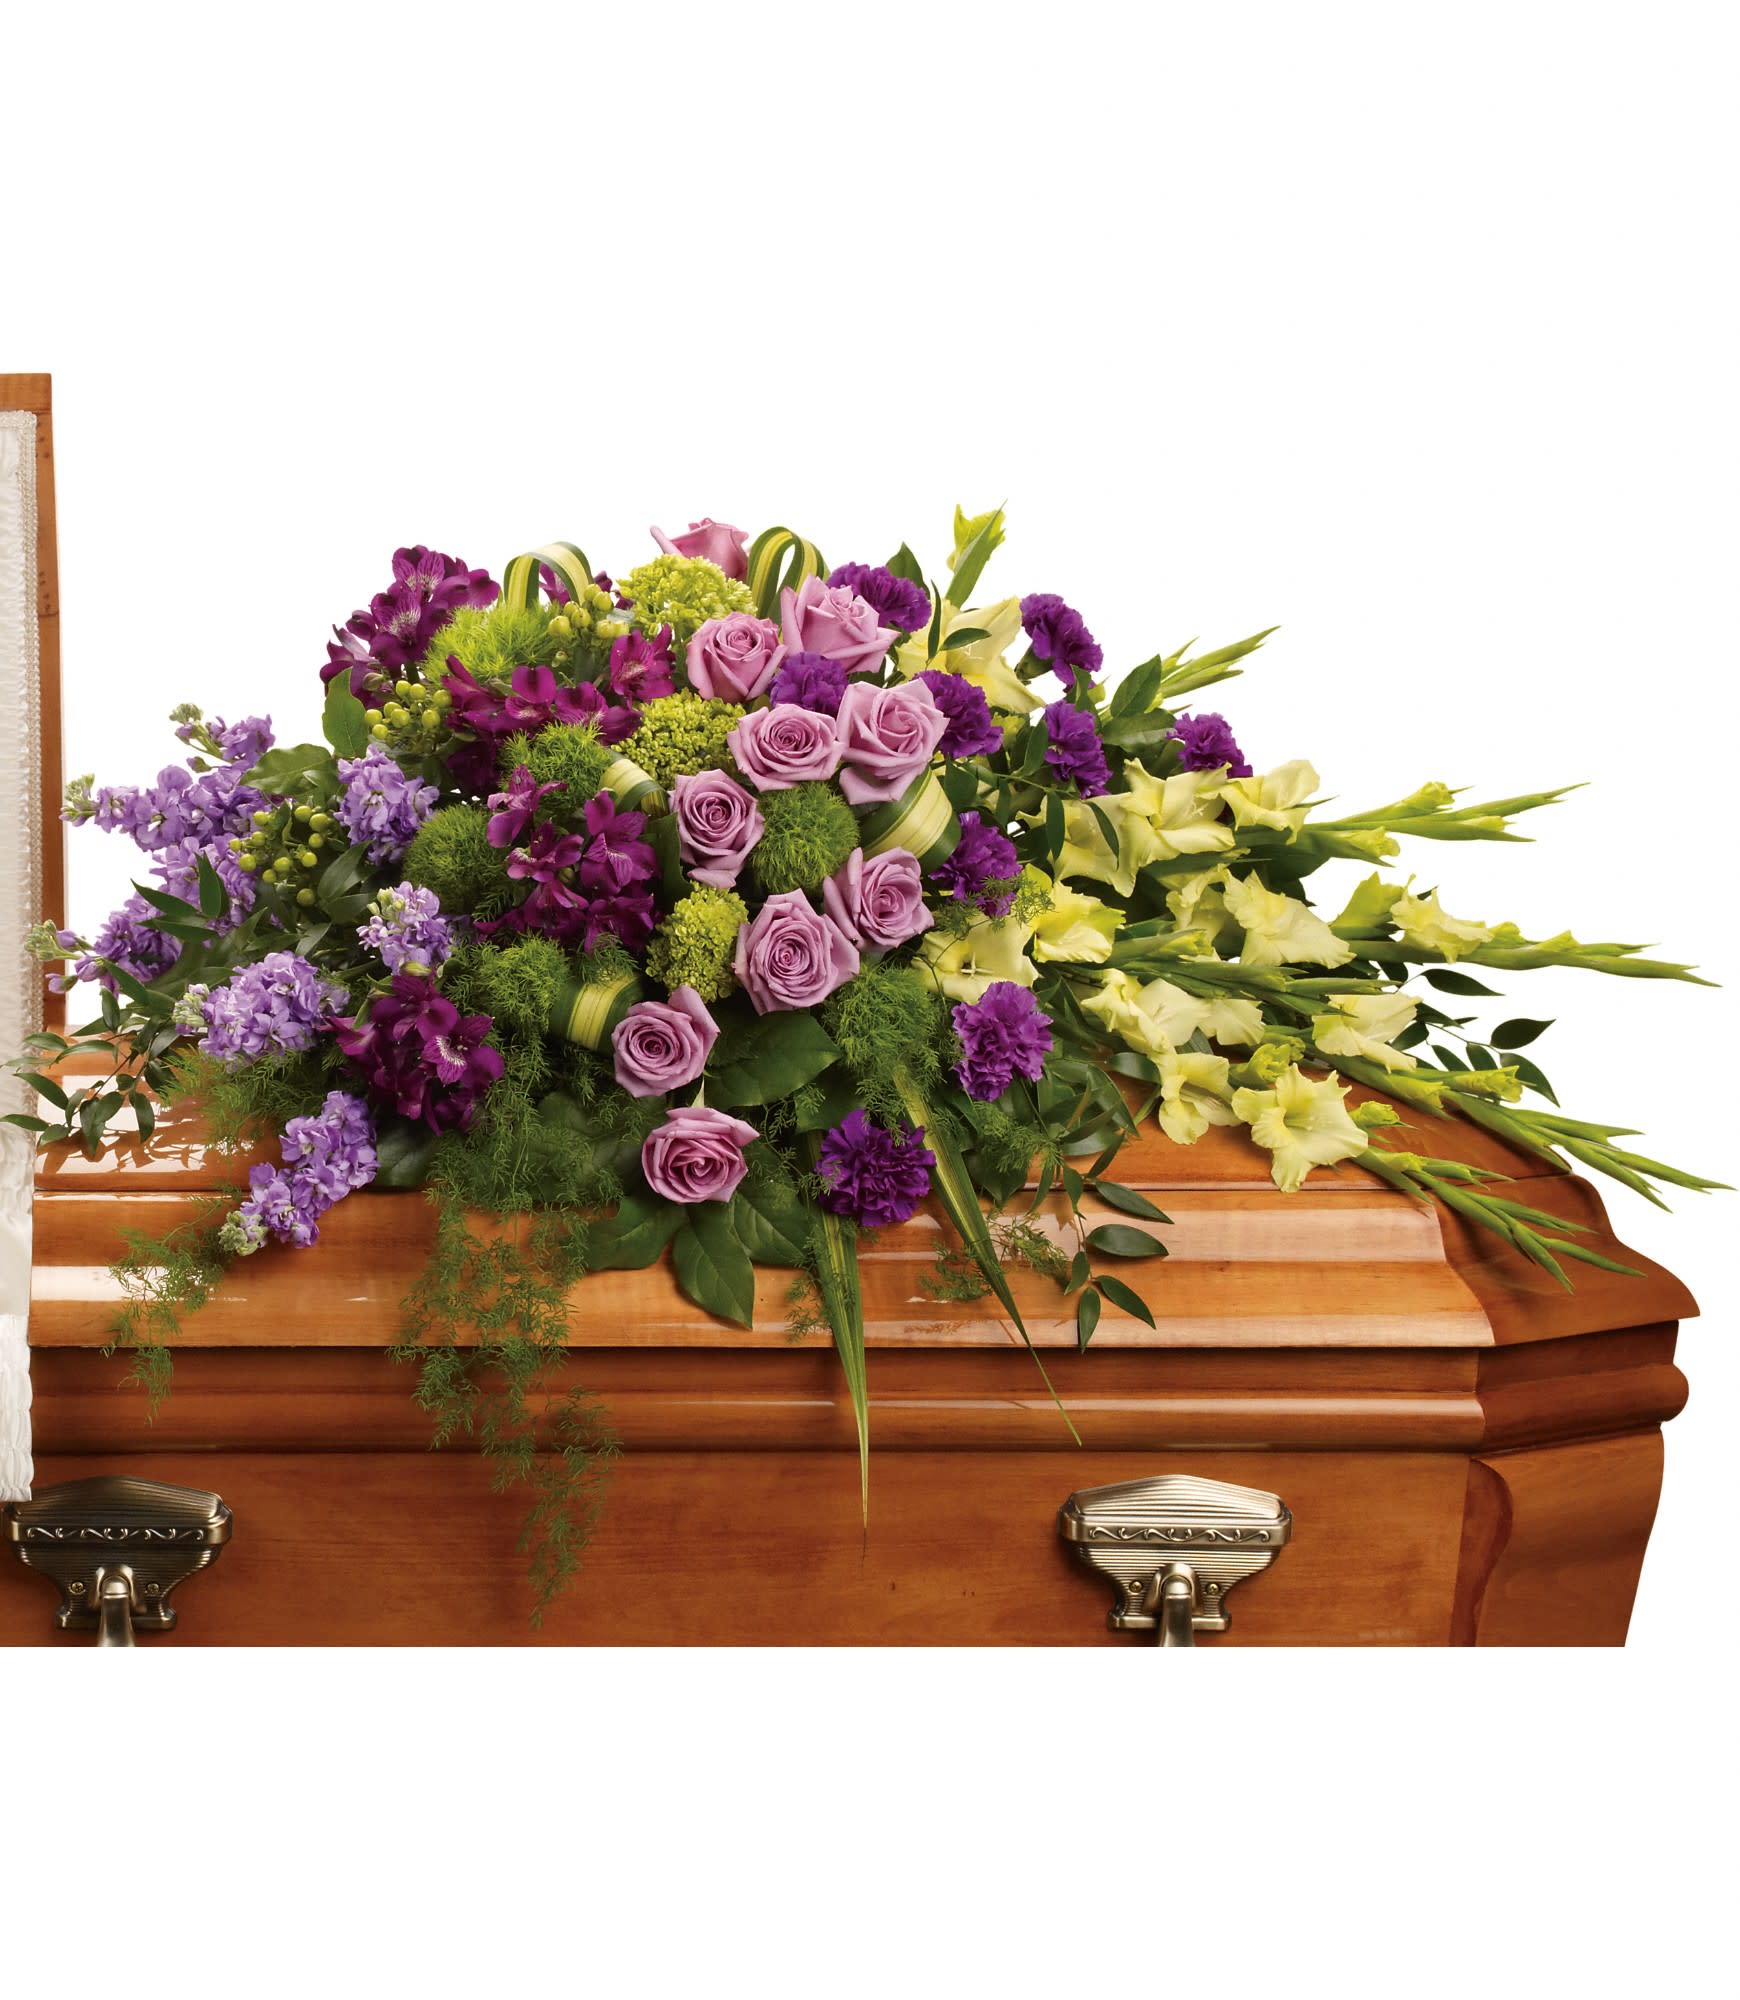 Reflections of Gratitude Casket Spray by Teleflora - Devotion is beautifully expressed with lavender roses, purple alstroemeria and other favorites artistically arranged and placed on top of the casket.  